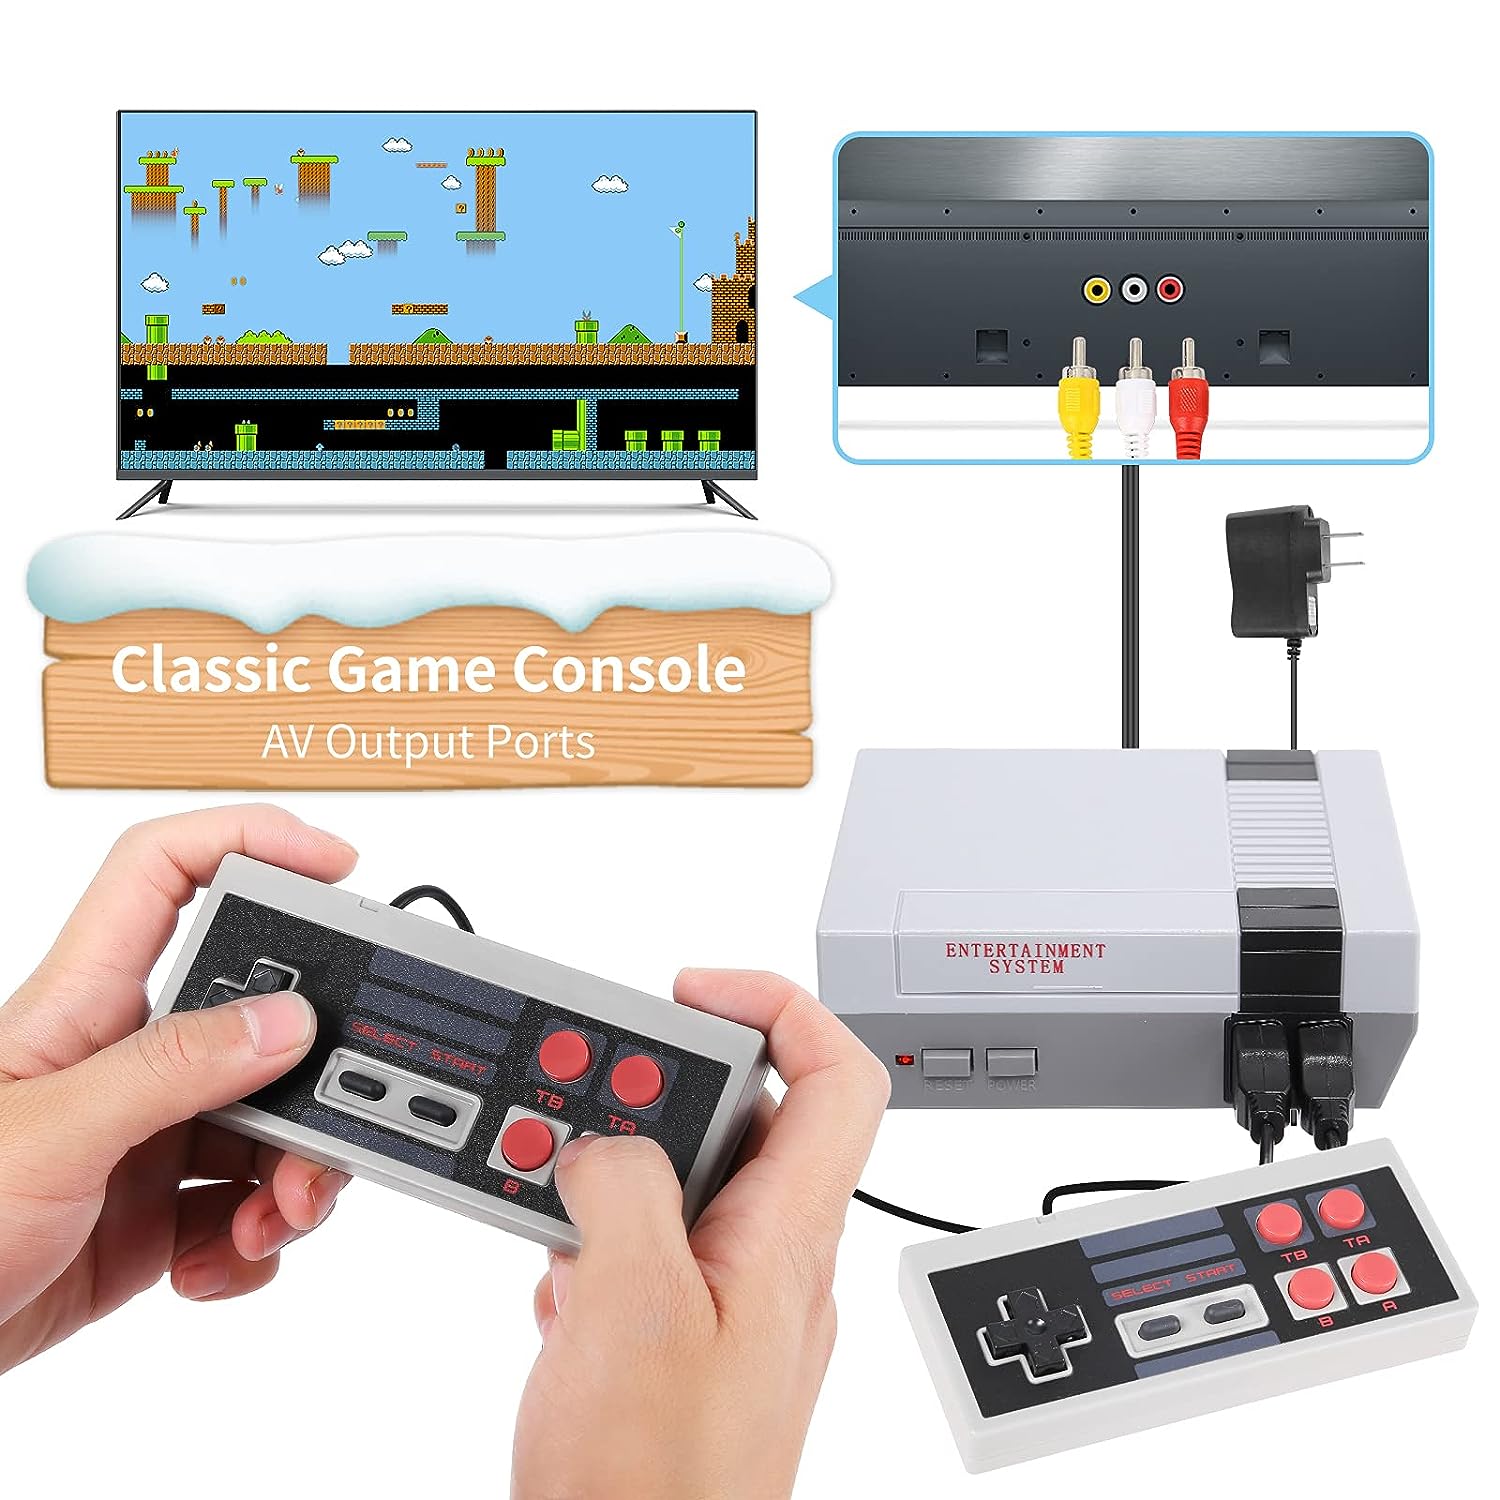 Plug & Play Classic Handheld Game Console, Upgrade Packaging Classic Game Console Built-in 620 Game, Video Game Player Console for Family TV Wired-Red